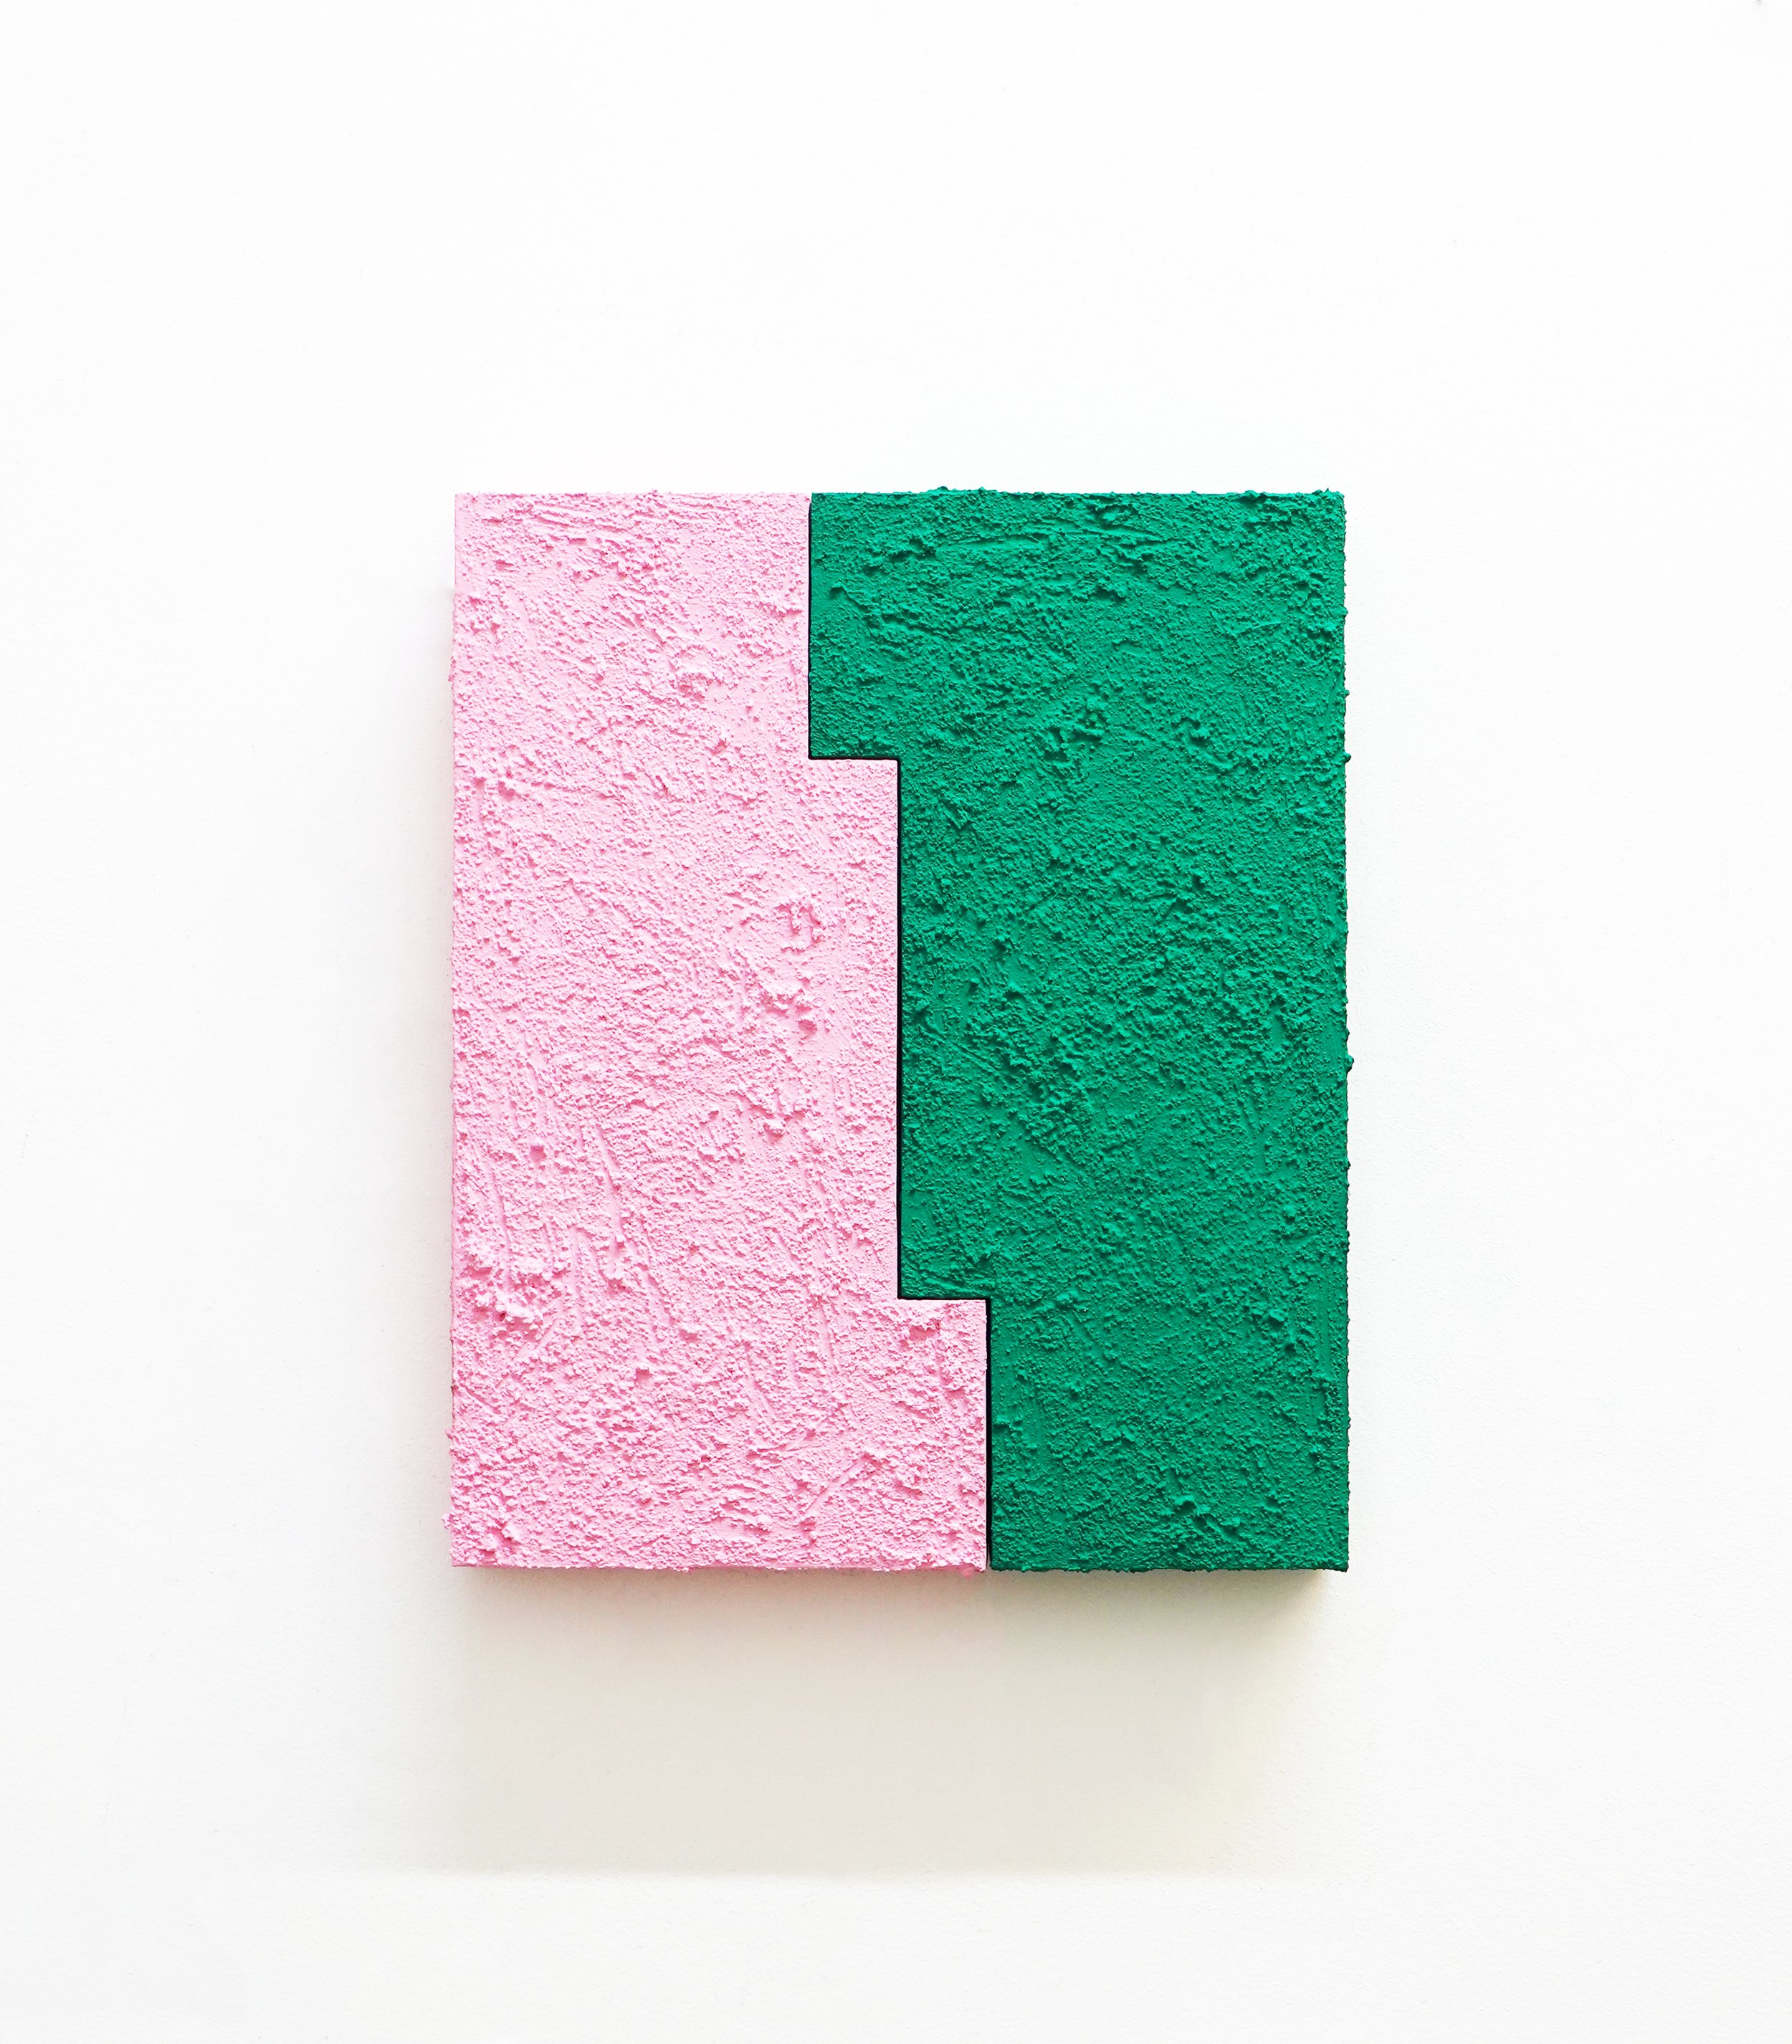  Abrazo : Cactus Blossoms, 2022, stucco, acrylic and vinyl on wood, 12 x 10” 